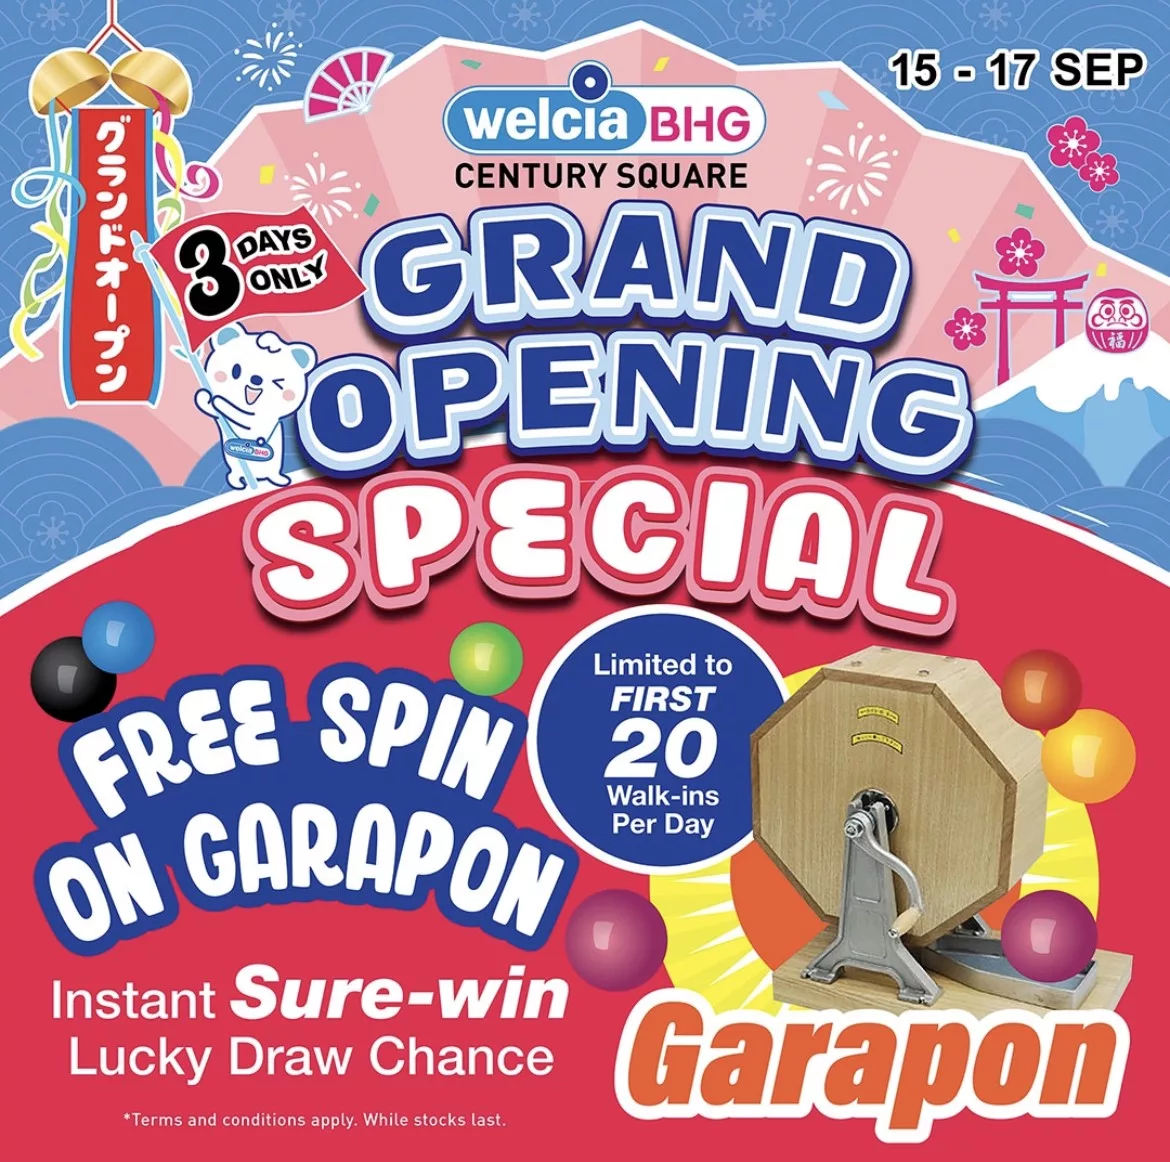 Welcia-BHG Century Square Grand Opening Free Instant Sure-win Lucky Draw Chance Garapon